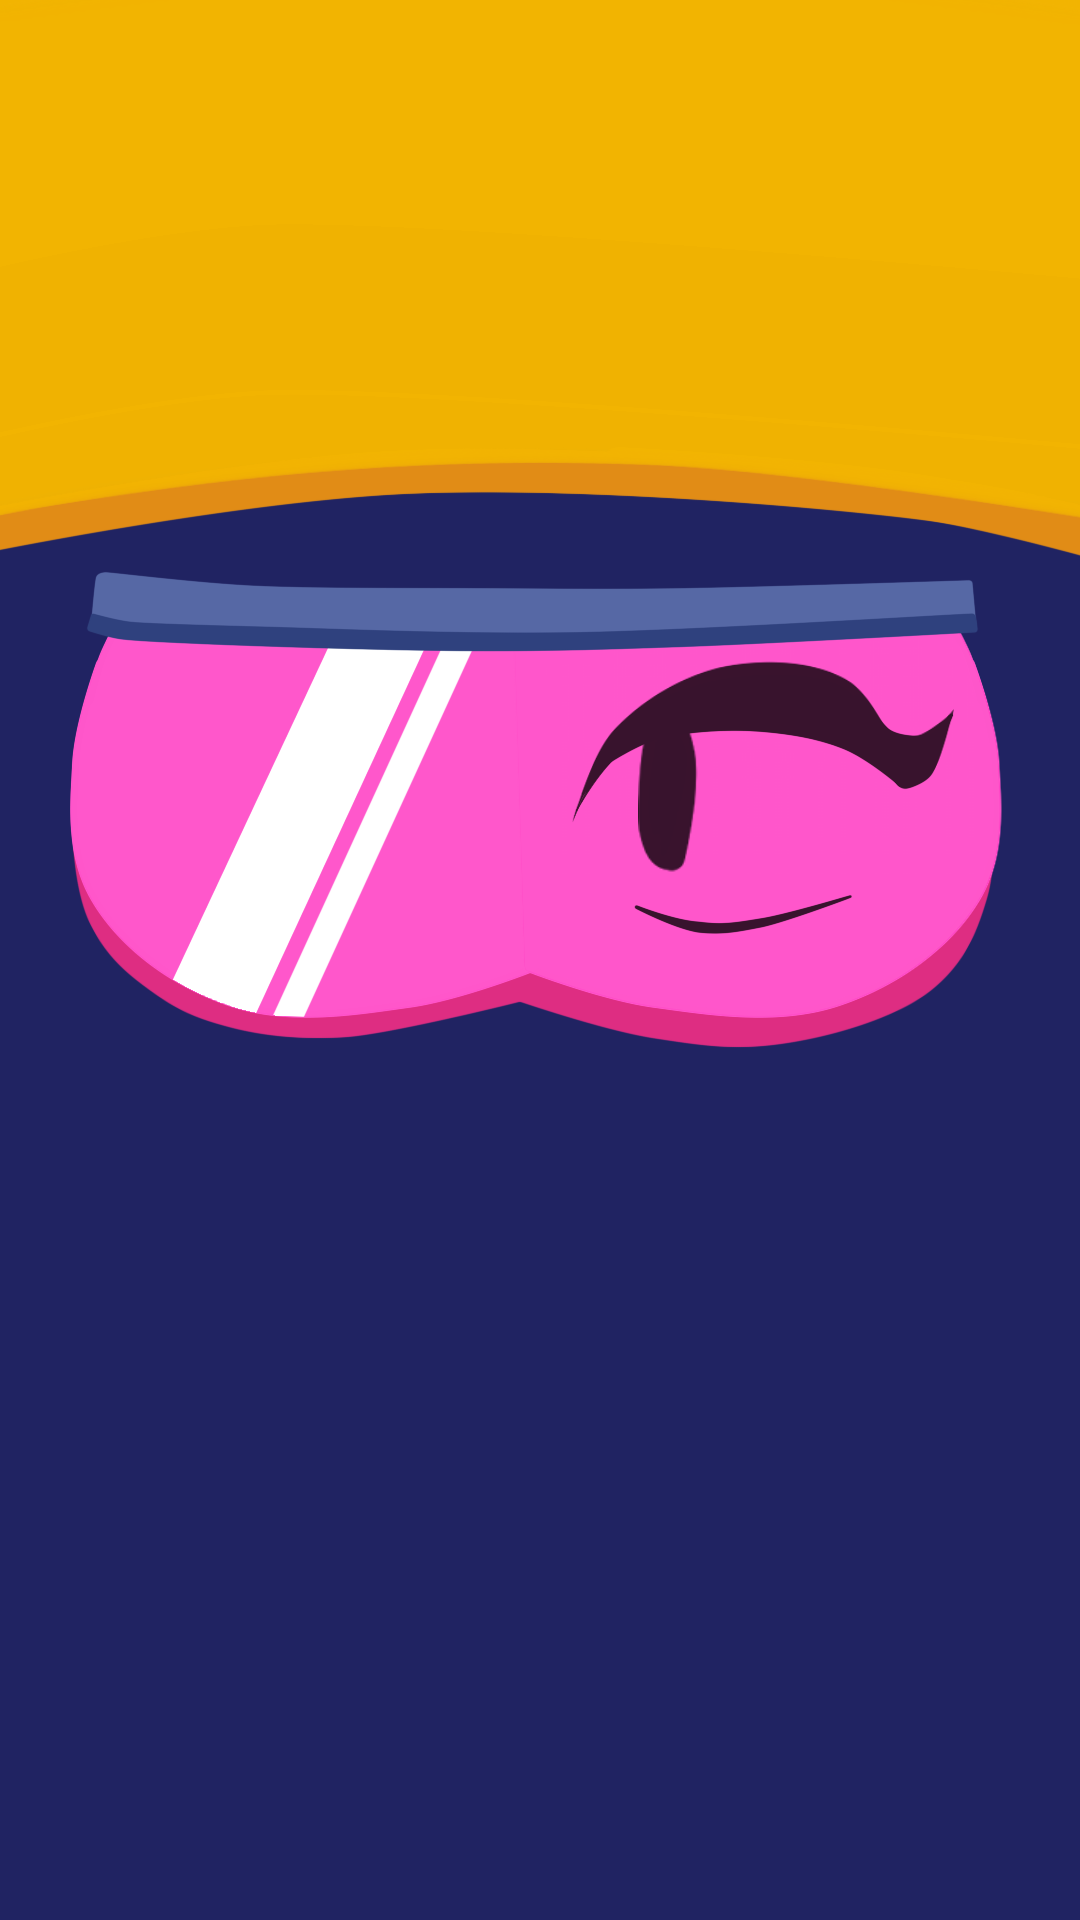 JACKY WALLPAPER! And this is my 3 brawlstars wallpaper! My